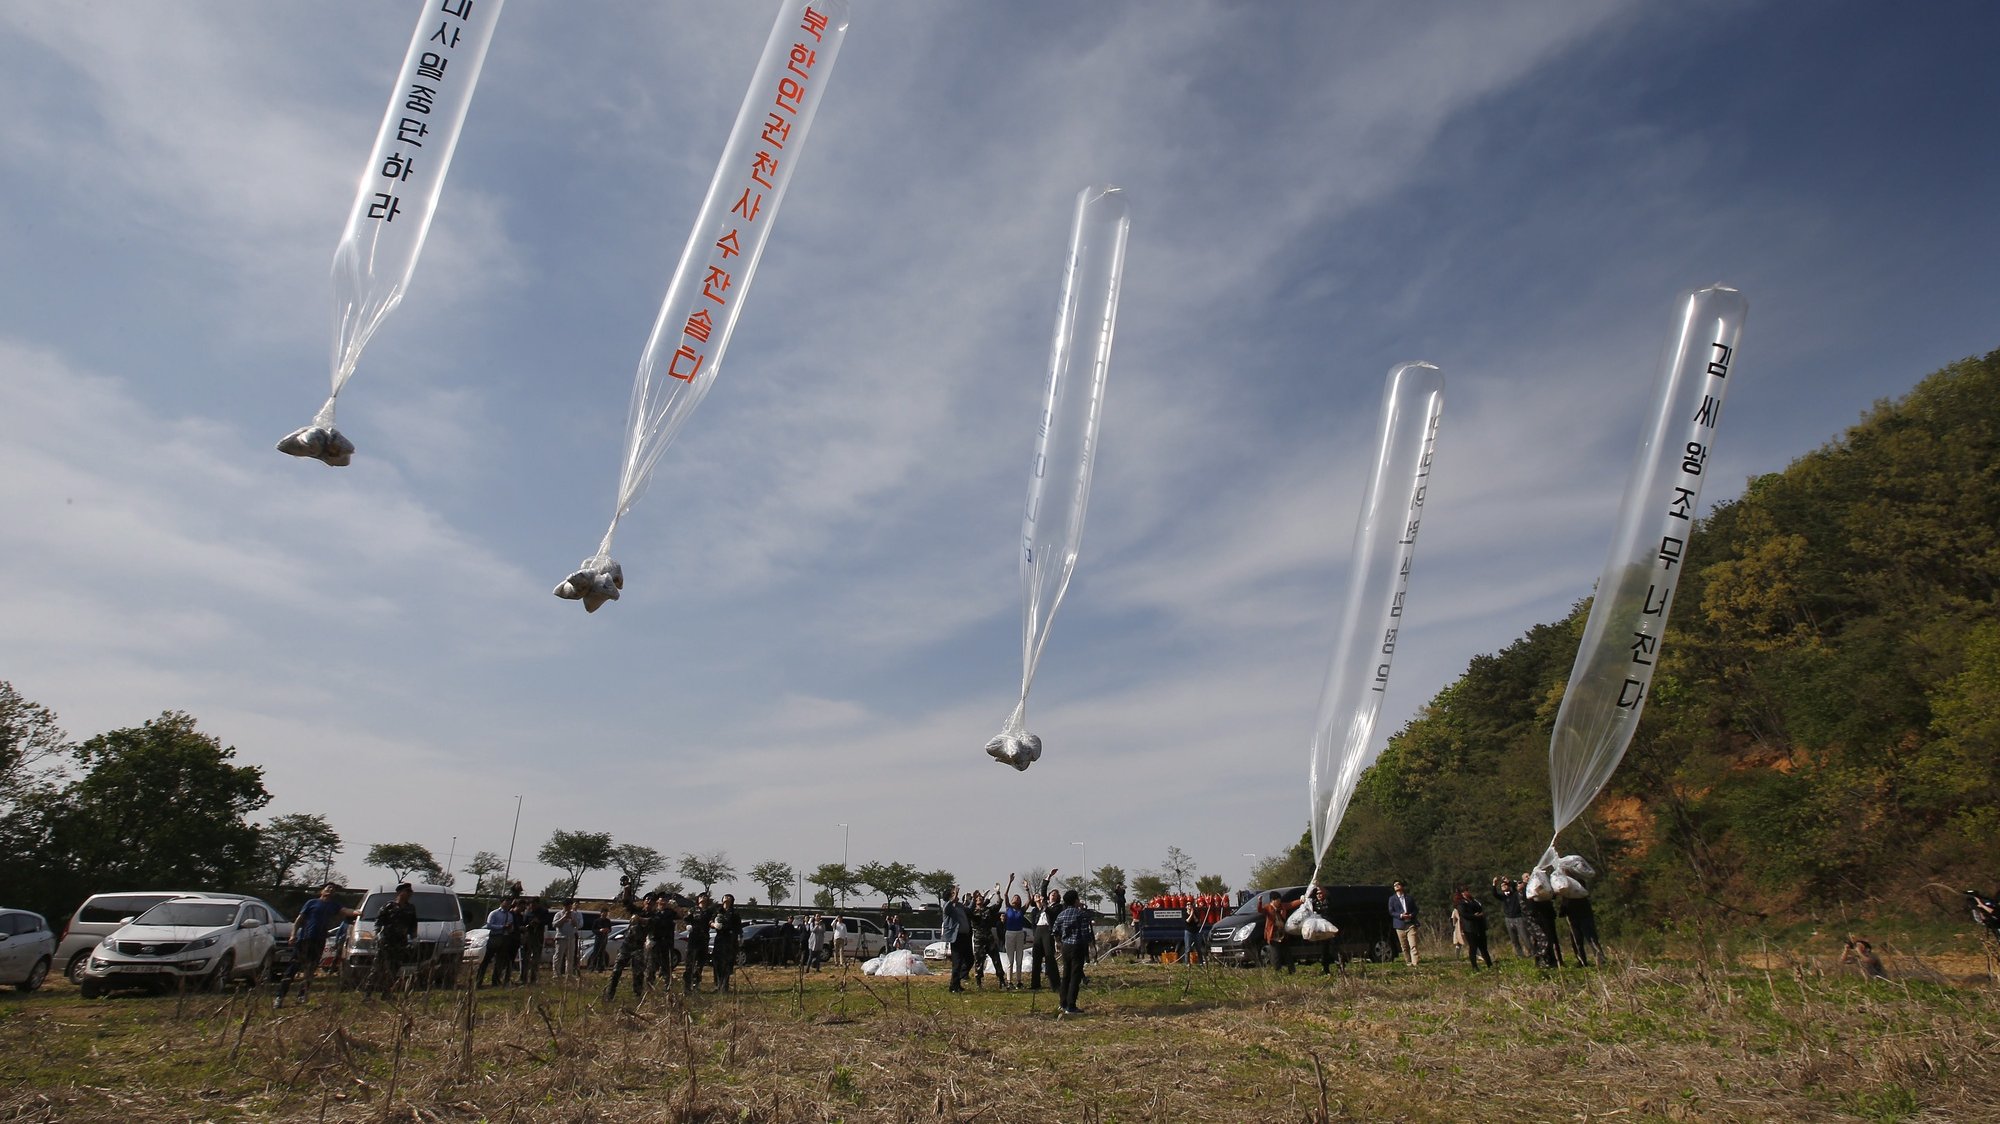 epa08464208 (FILE) - Members of Fighters for Free North Korea, an organization of defectors from North Korea, send balloons carrying anti-Pyongyang leaflets across the border from the South Korean border city of Paju South Korea, 02 April 2016 (reissued 04 June 2020). South Korea called for a halt to a civic campaign to send anti-Pyongyang propaganda leaflets into North Korea, hours after the North threatened to scrap a military tension reduction agreement and exchange projects unless Seoul stops the campaign.  EPA/YONHAP SOUTH KOREA OUT